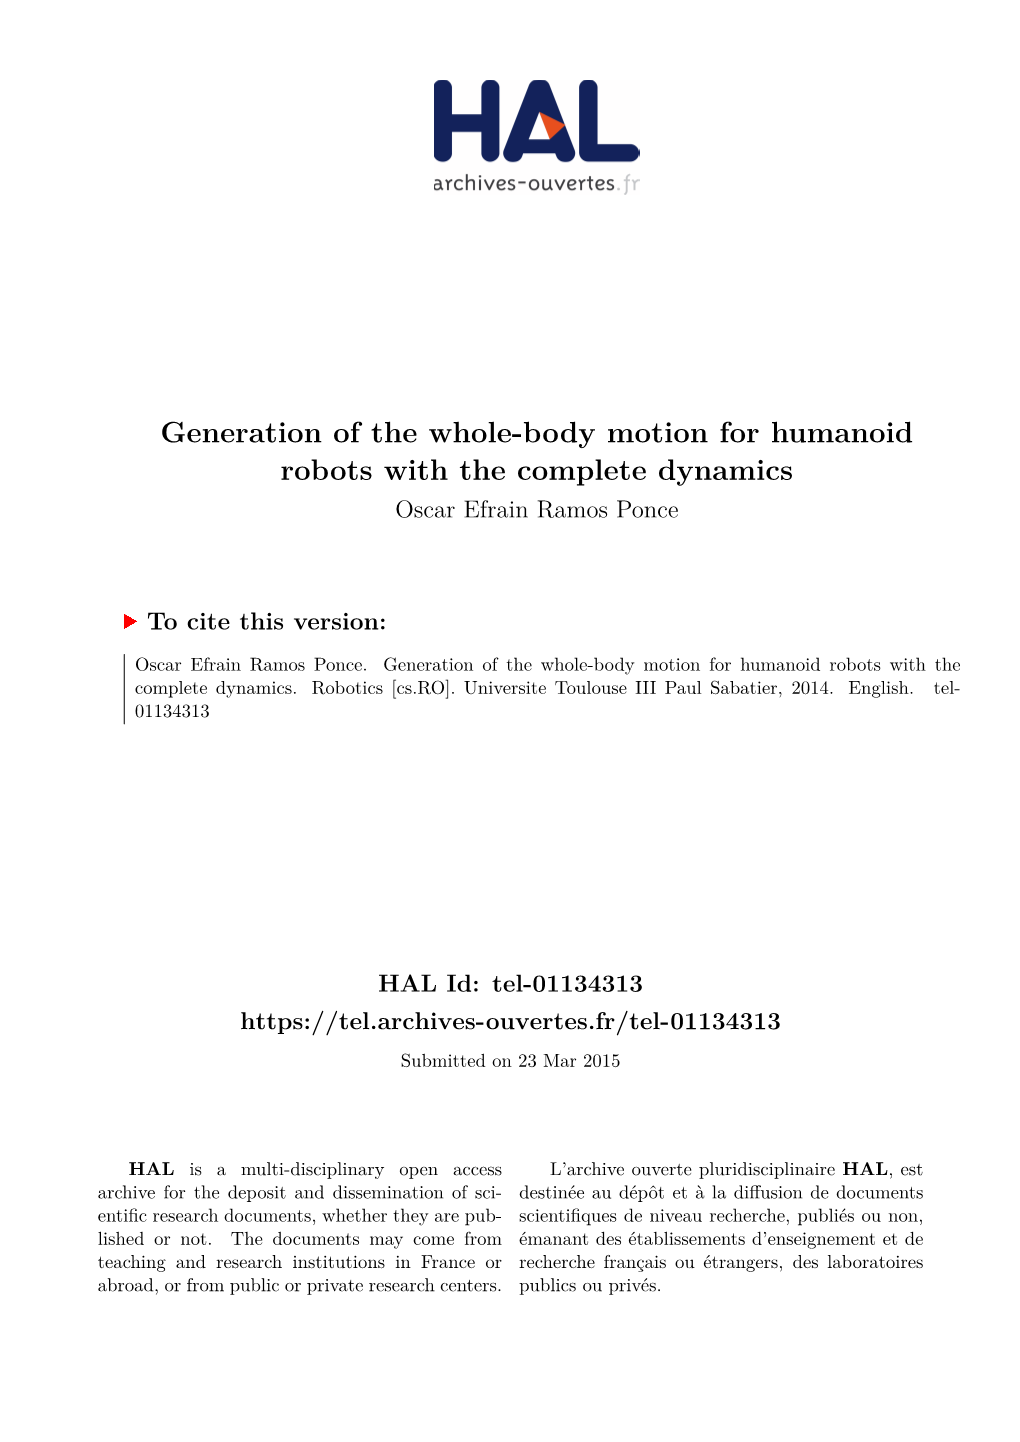 Generation of the Whole-Body Motion for Humanoid Robots with the Complete Dynamics Oscar Efrain Ramos Ponce